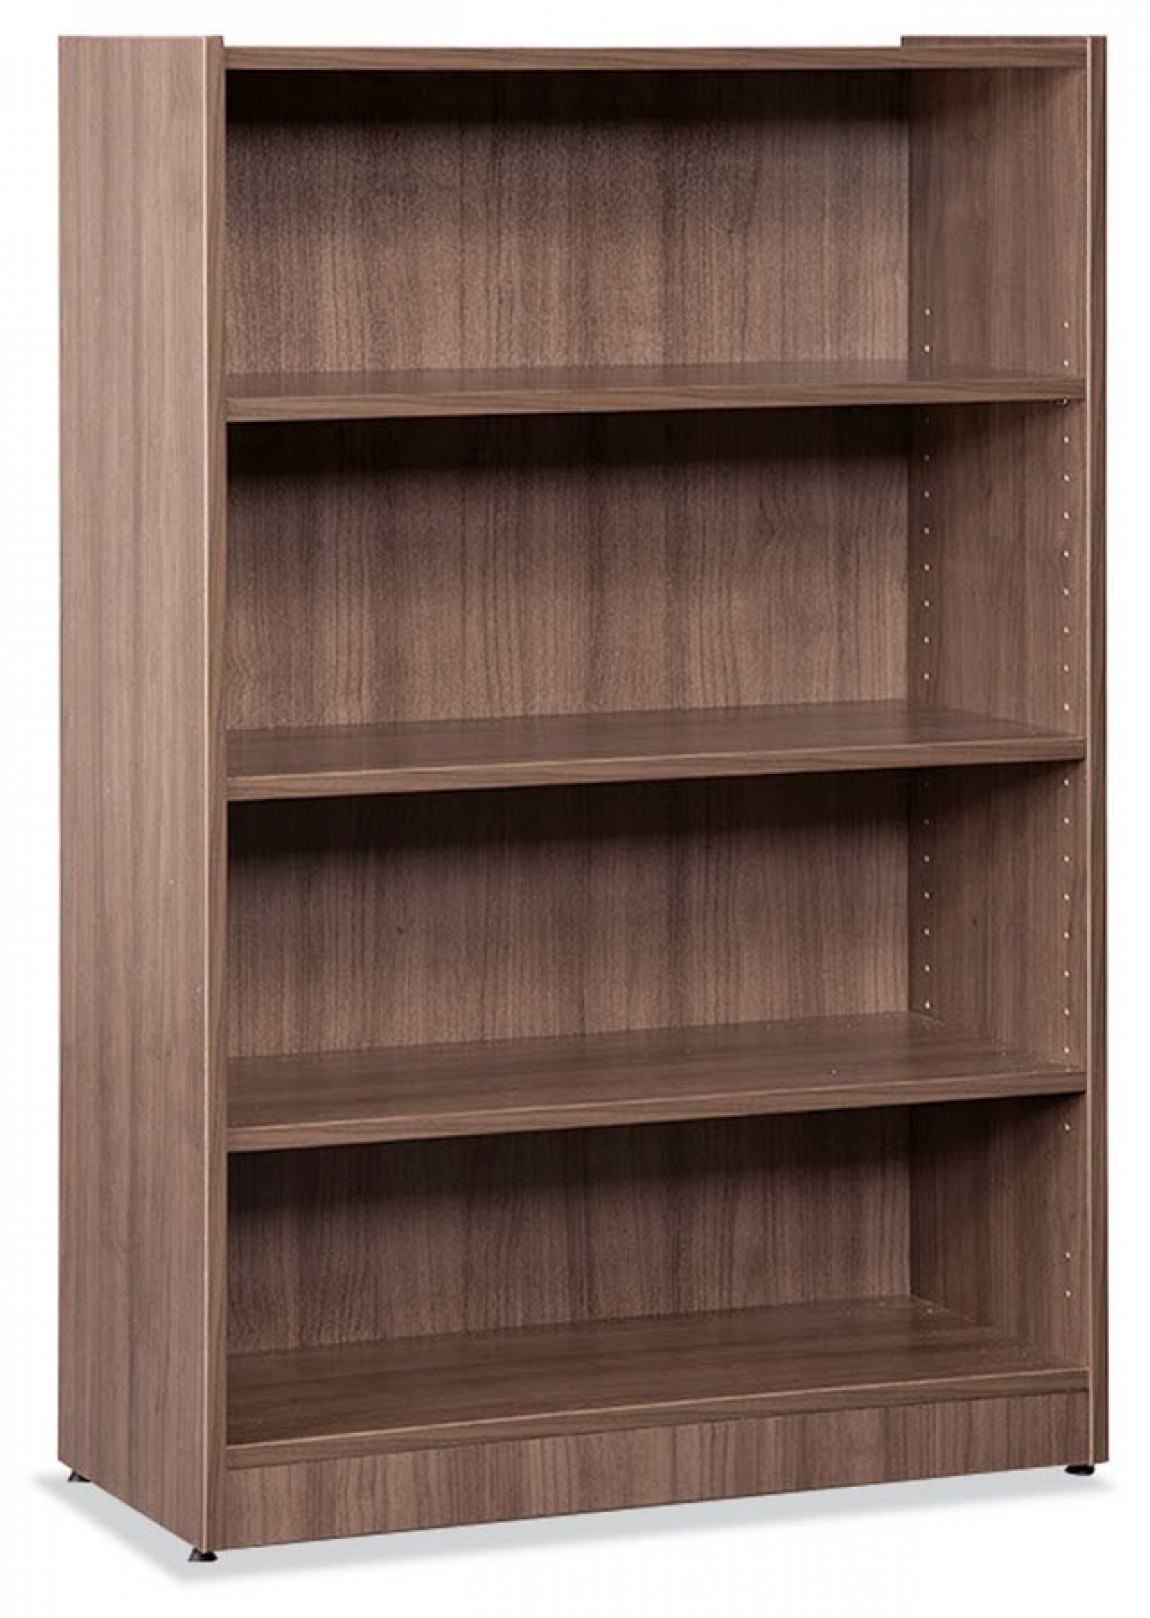 48" Laminate Bookcase with Adjustable Shelves 